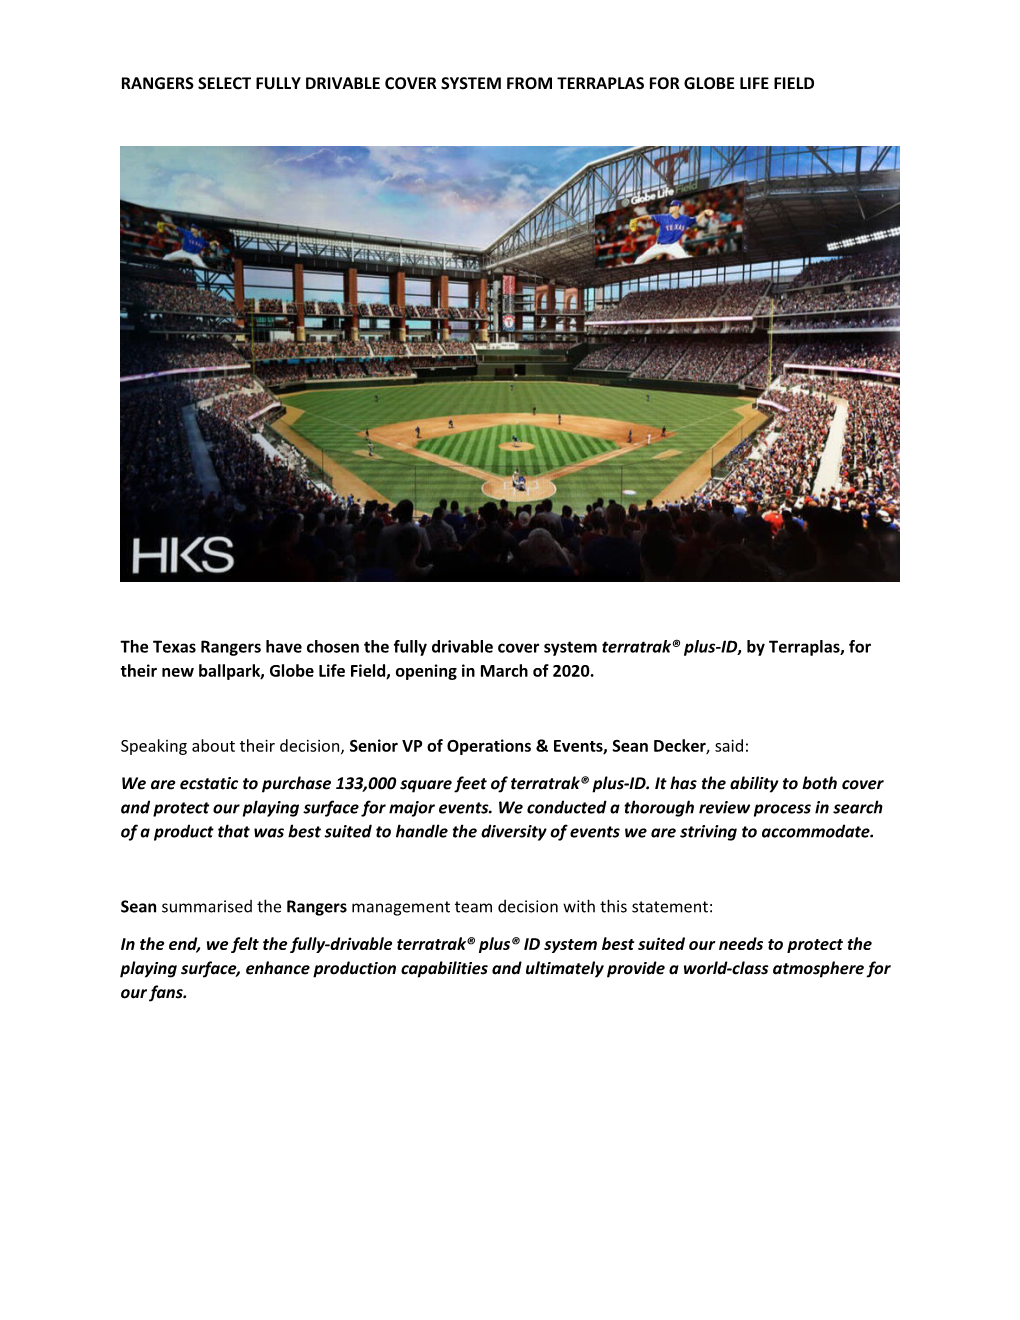 Rangers Select Fully Drivable Cover System from Terraplas for Globe Life Field